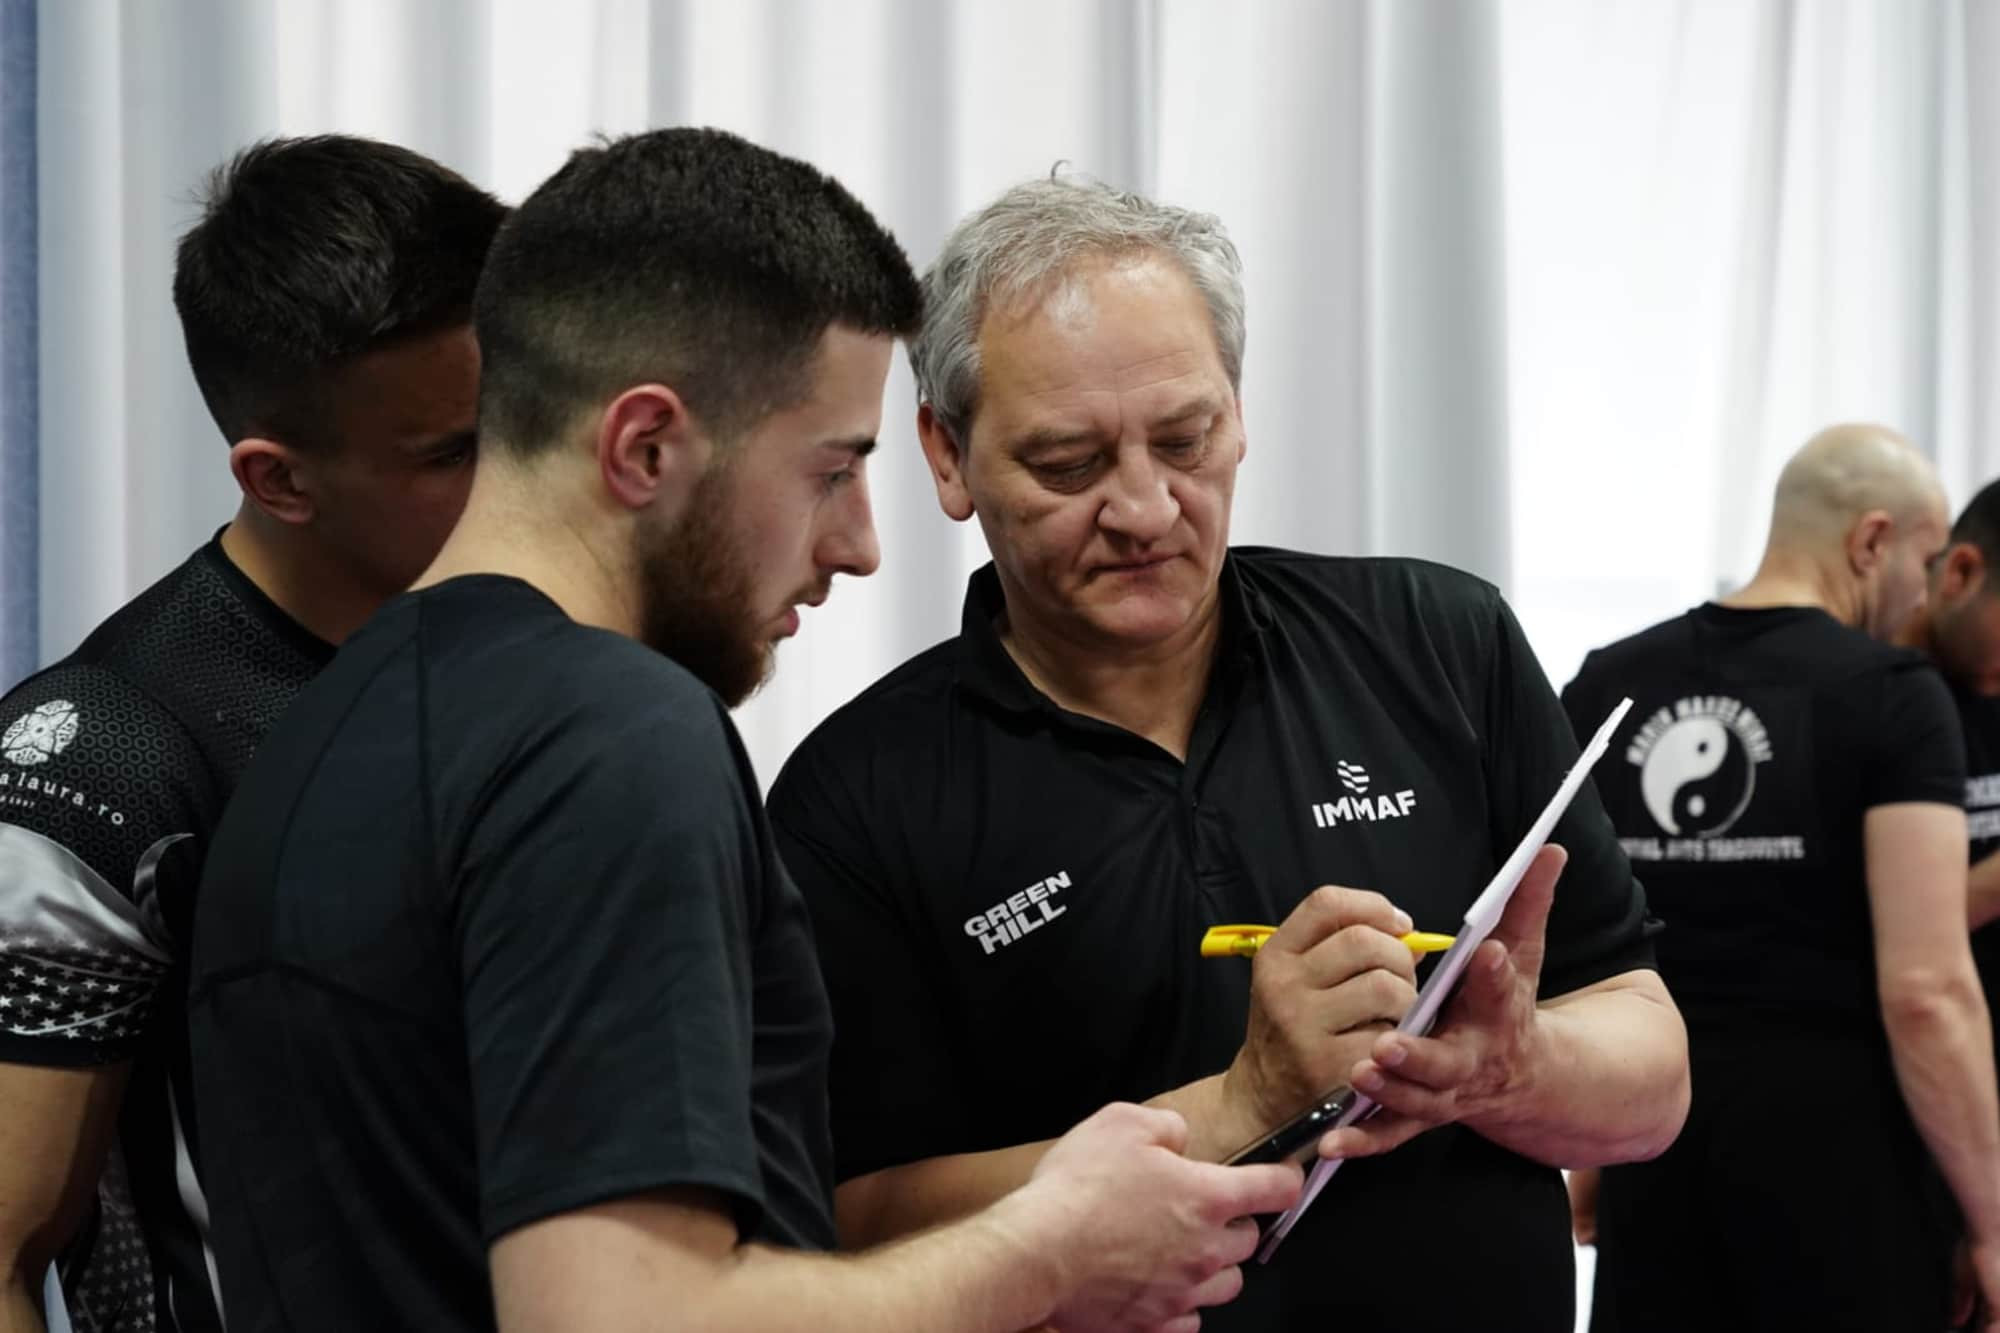 IMMAF coaching courses held in Middle East and Central Asia before Youth World Championships